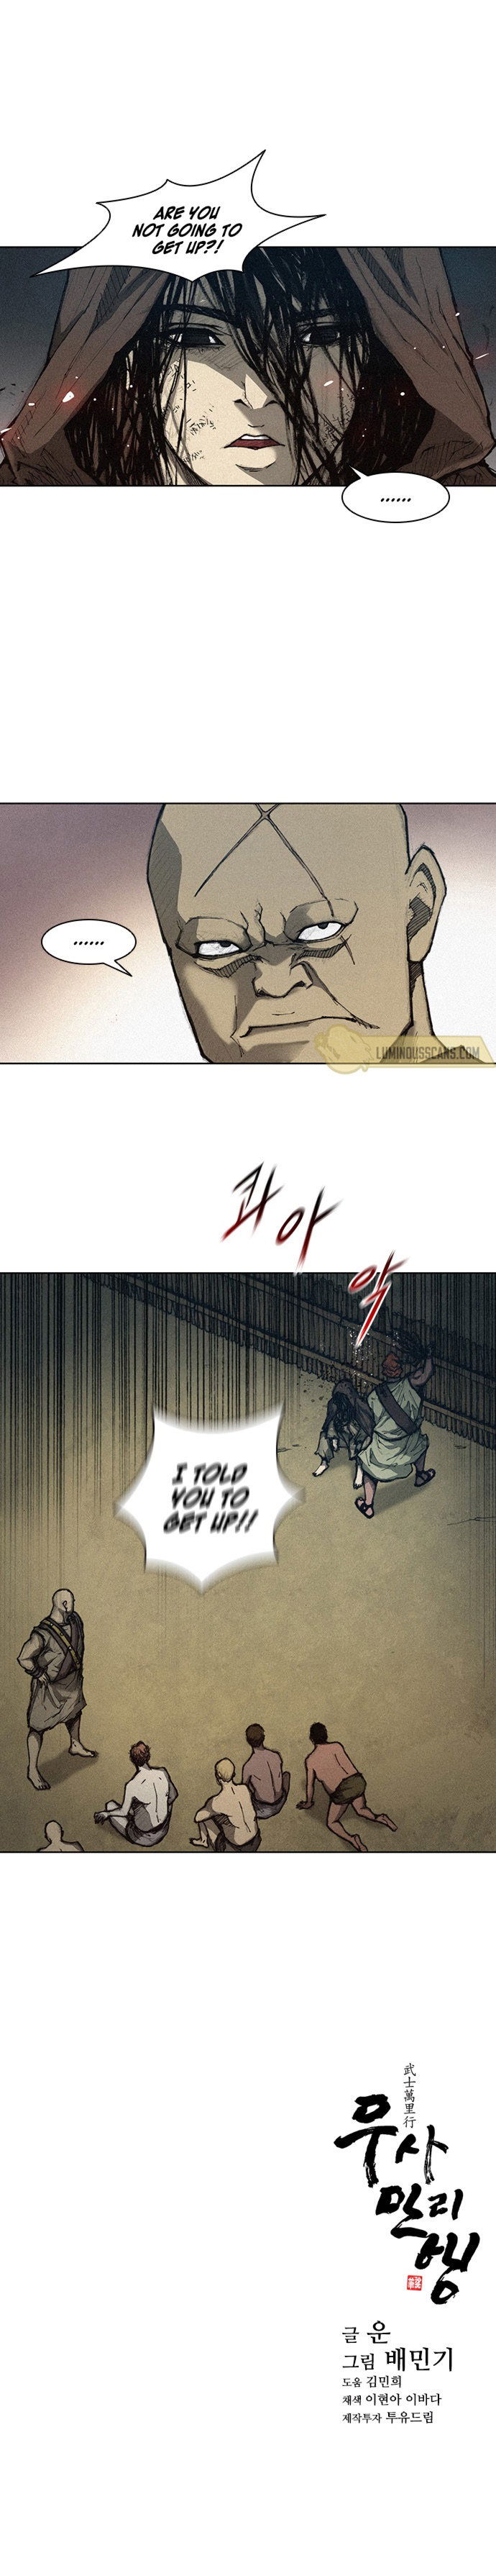 long-way-of-the-warrior-chap-3-8